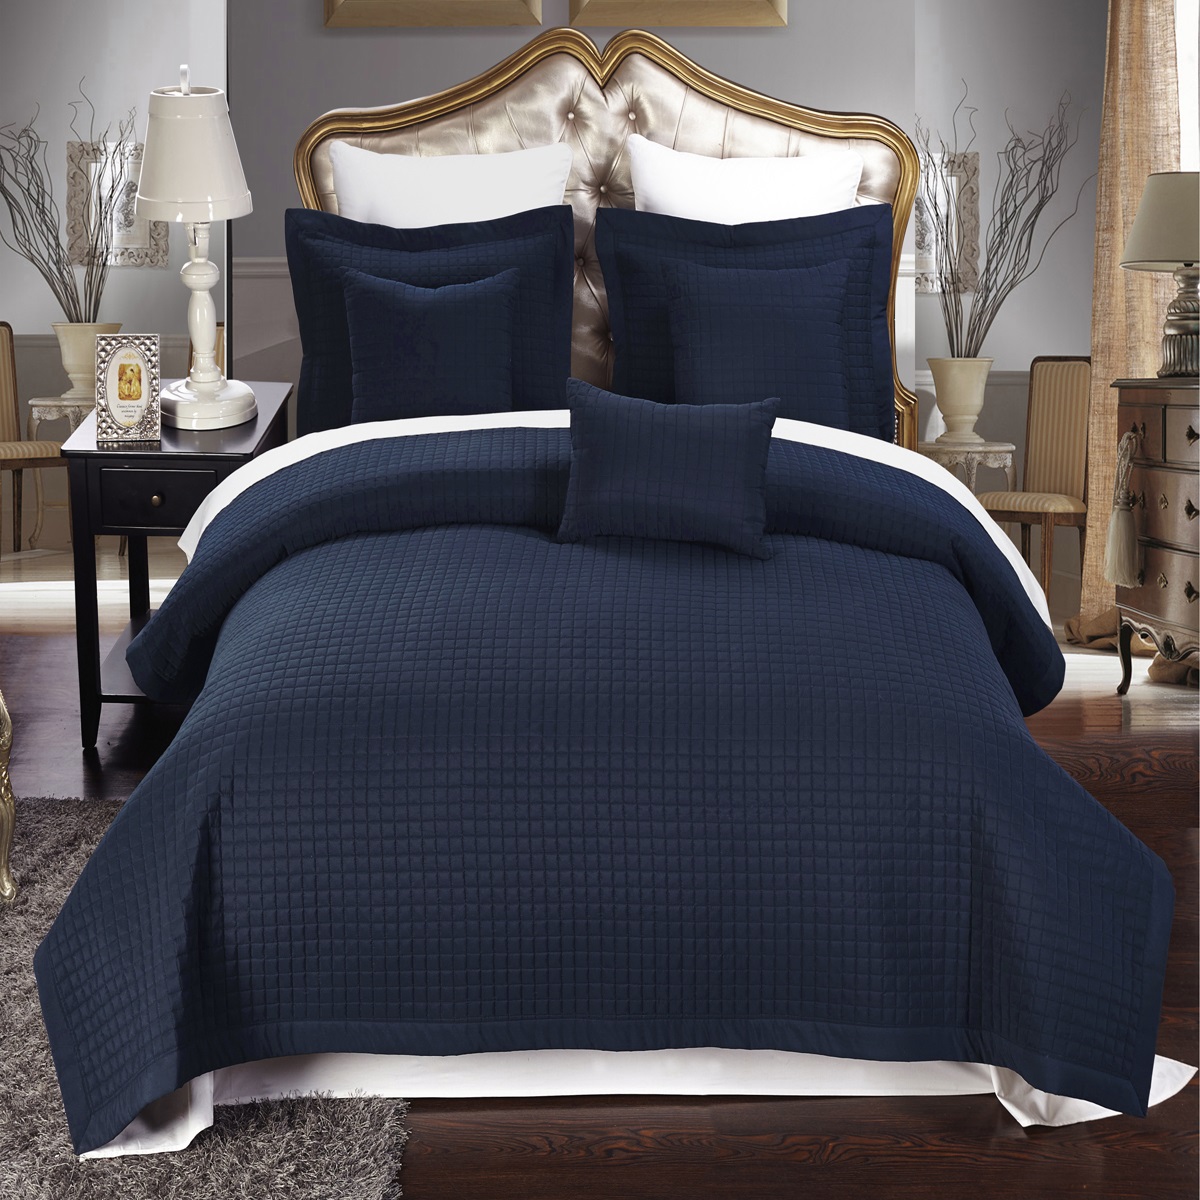 GoLinens Luxury Navy Checkered Quilted Wrinkle Free Microfiber 6 Piece Coverlets Set